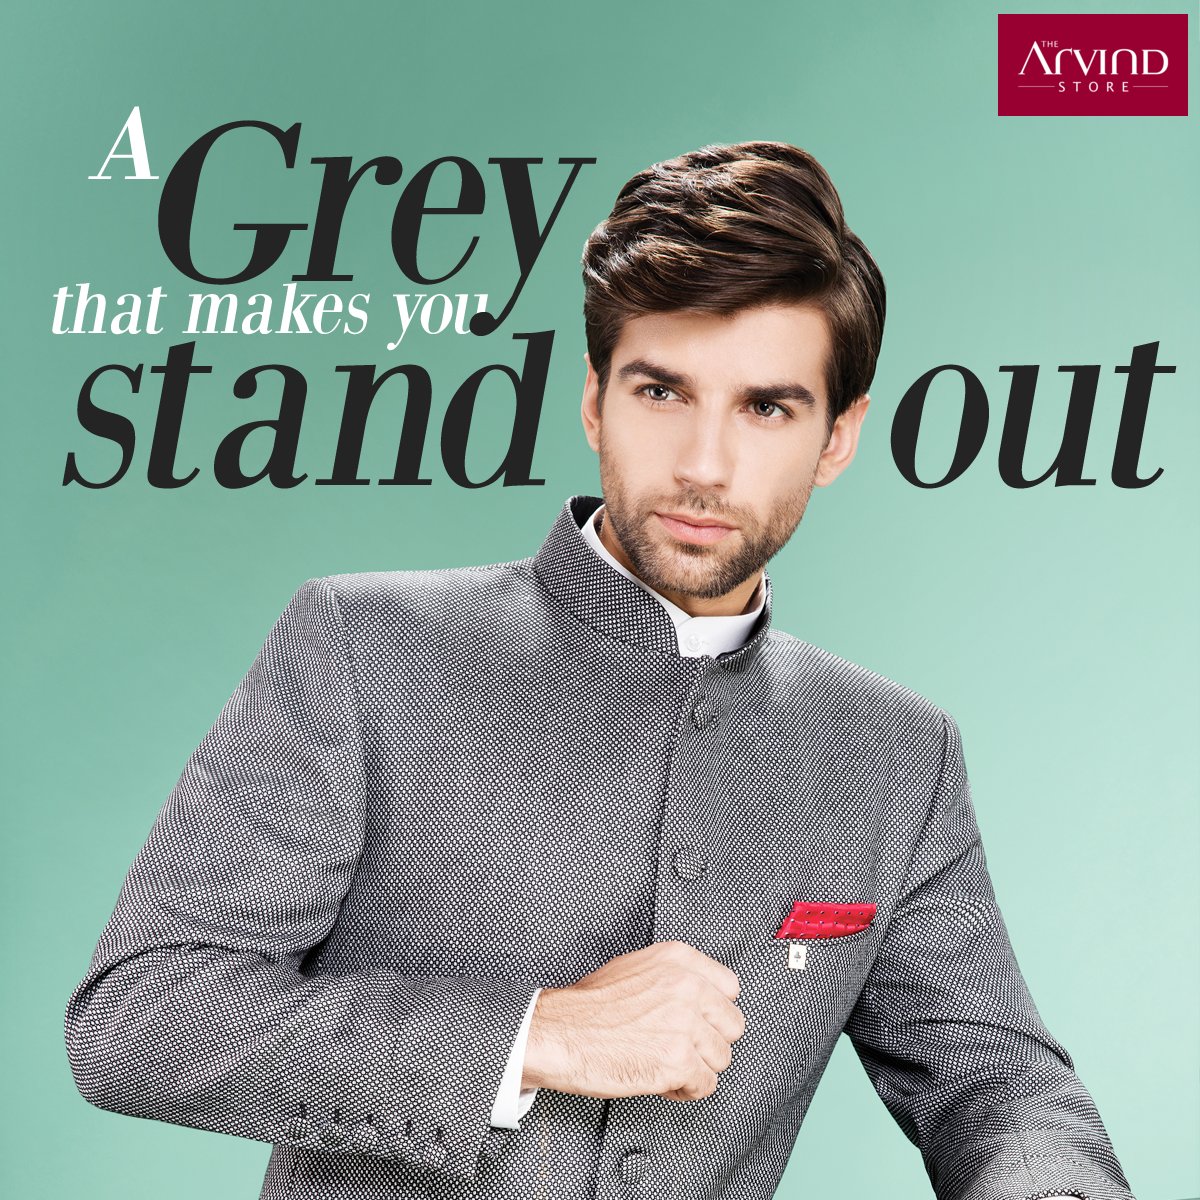 Look sophisticated for the evening with a charcoal grey Jodhpuri and a white Kurta. #ArvindStyleTips https://t.co/ZA56FHMK3f